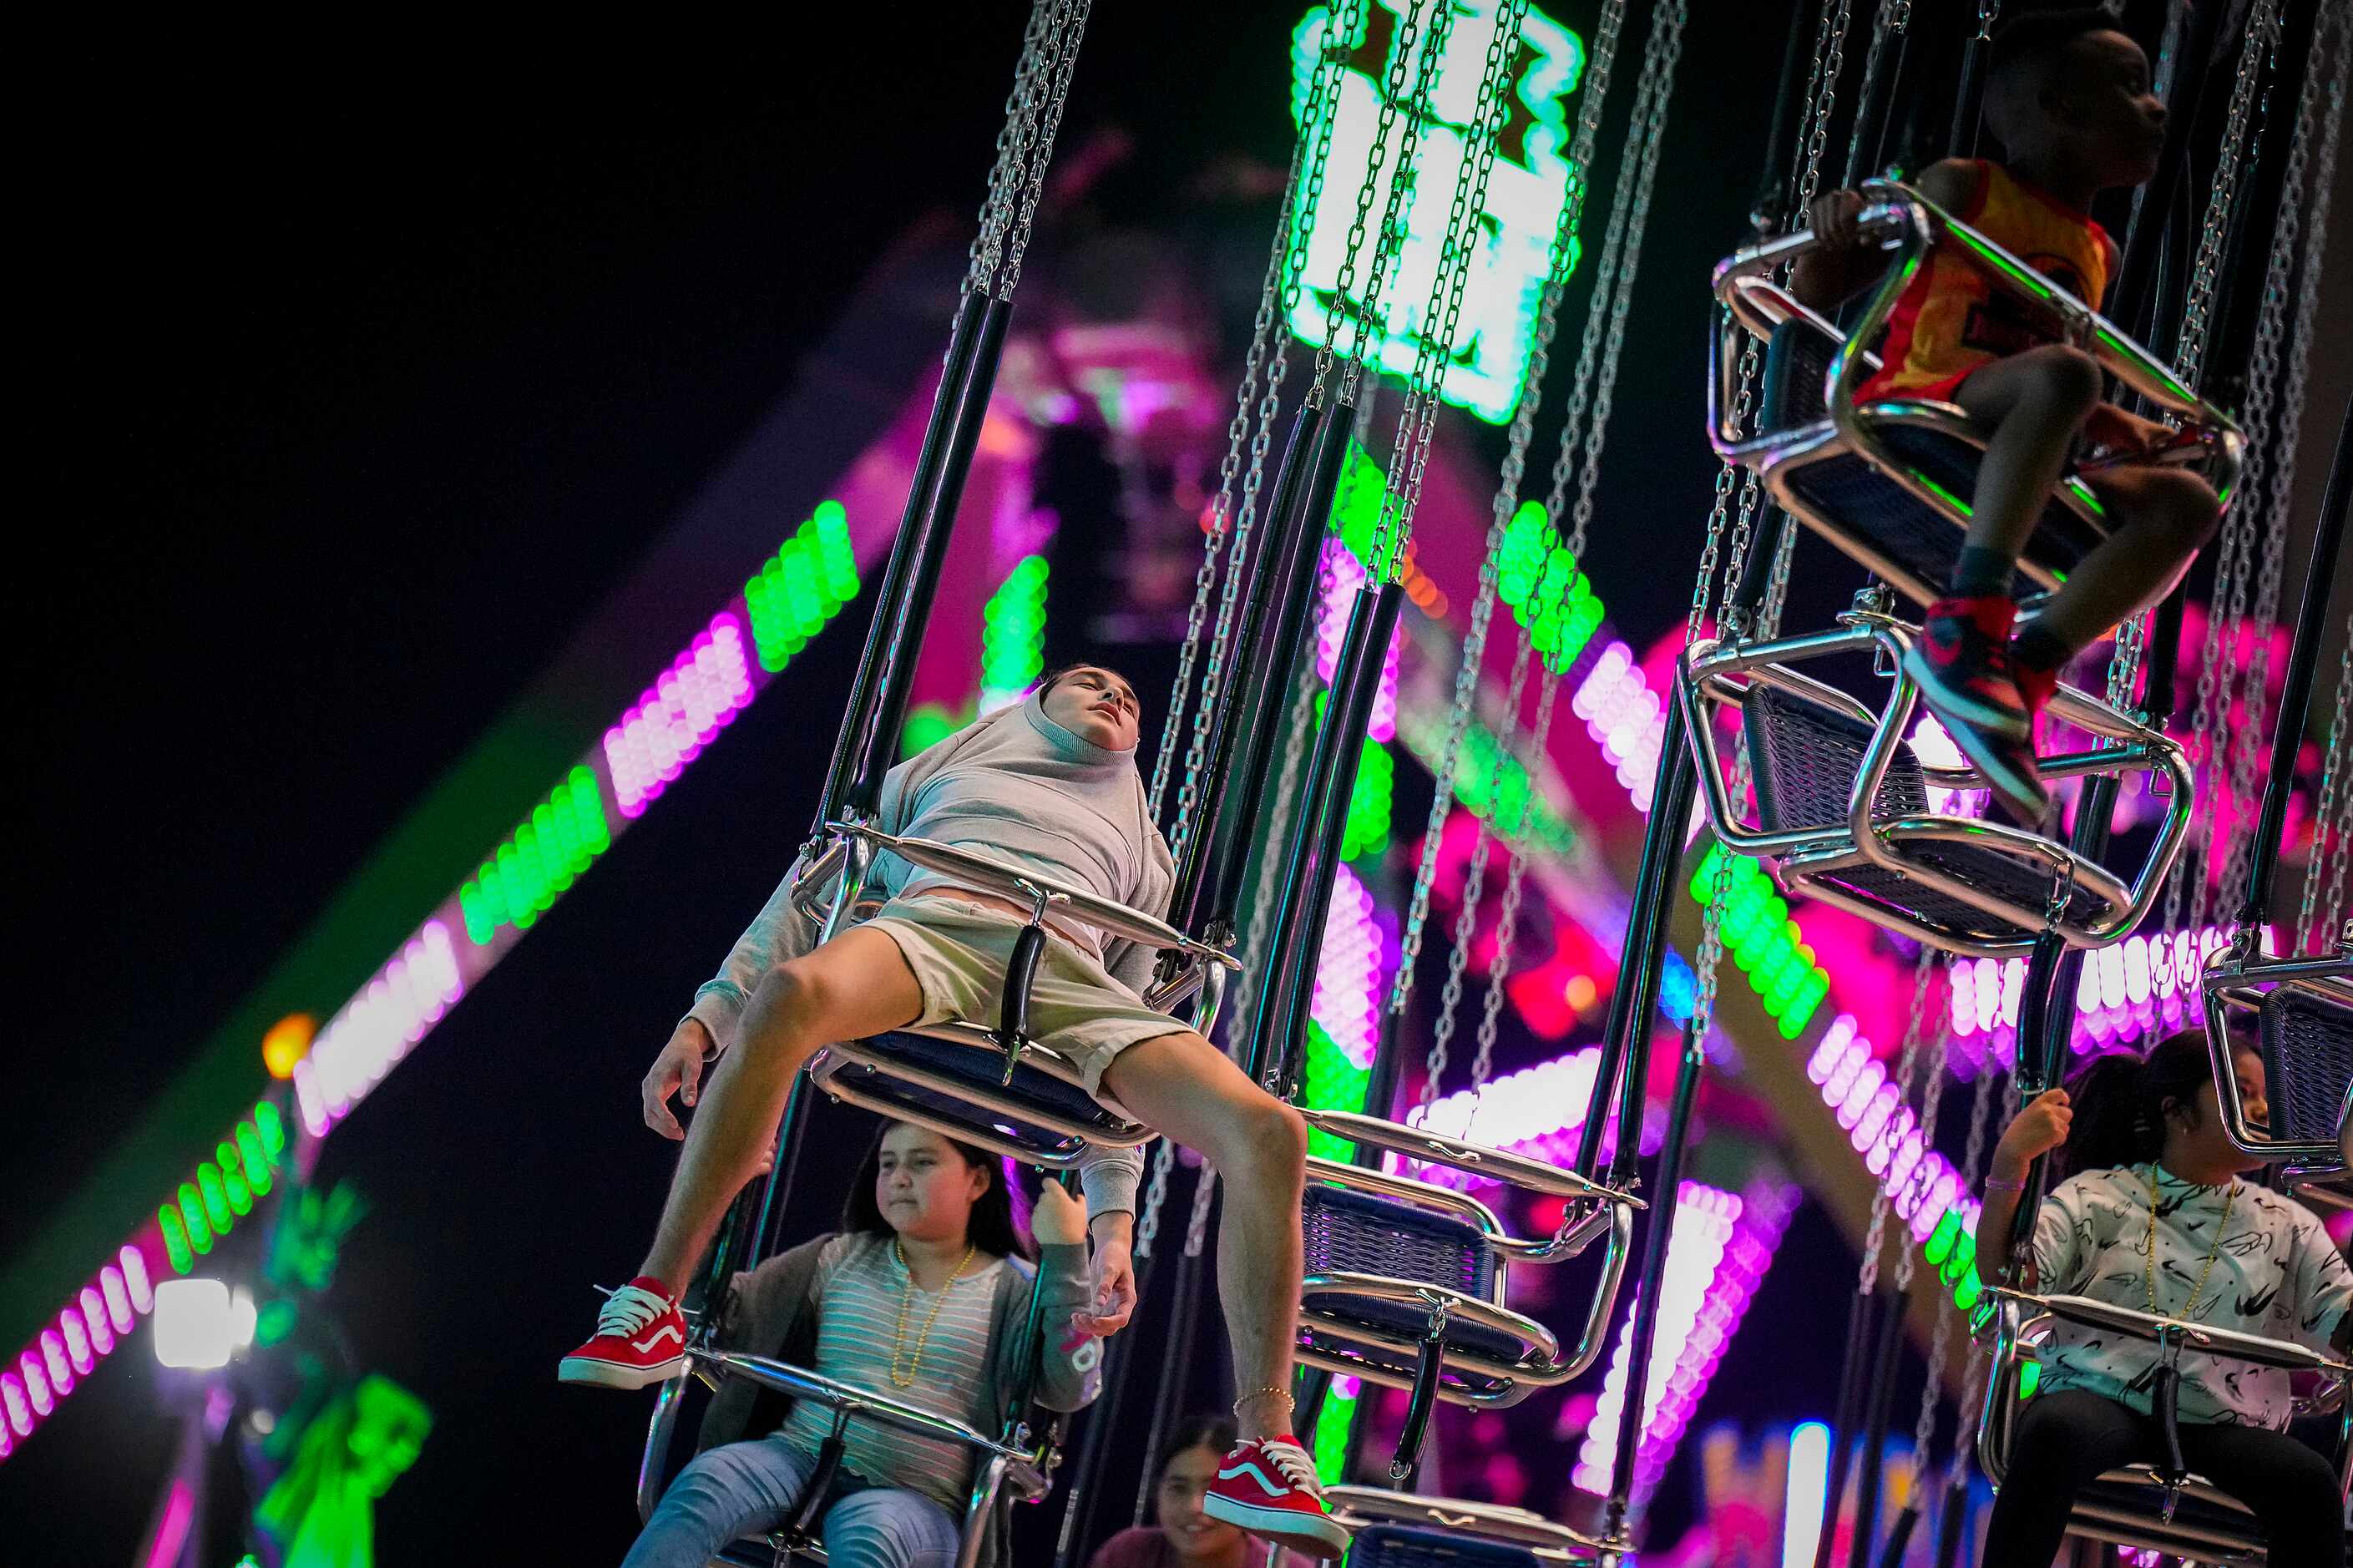 Fairgoers spin through the night sky on opening night at the State Fair of Texas on Friday,...